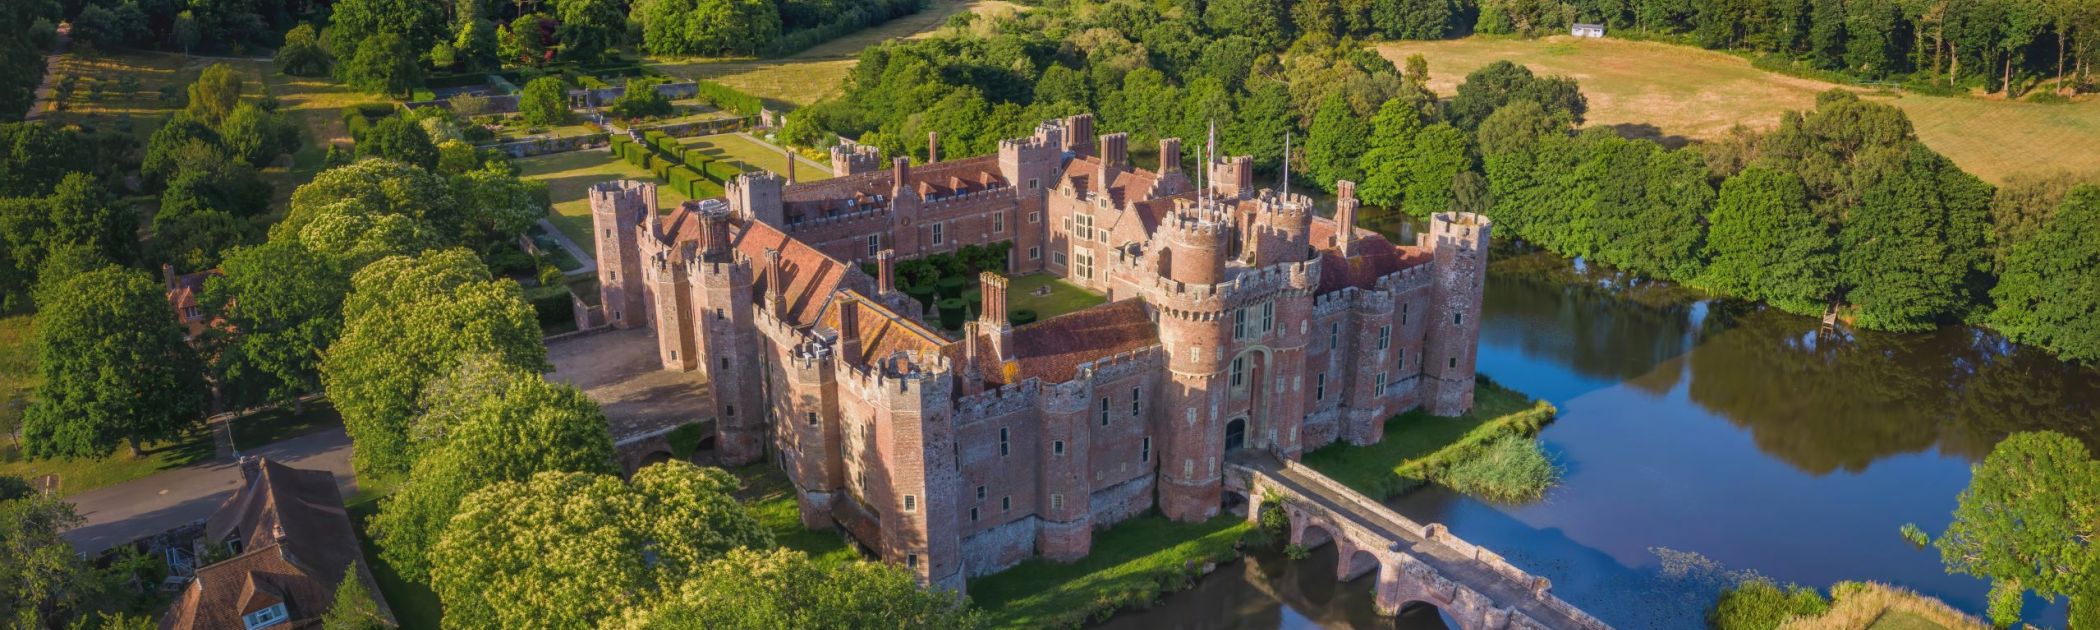 An aerial image of Herstmonceux Castle in a forested area with a pond and a red brick castle